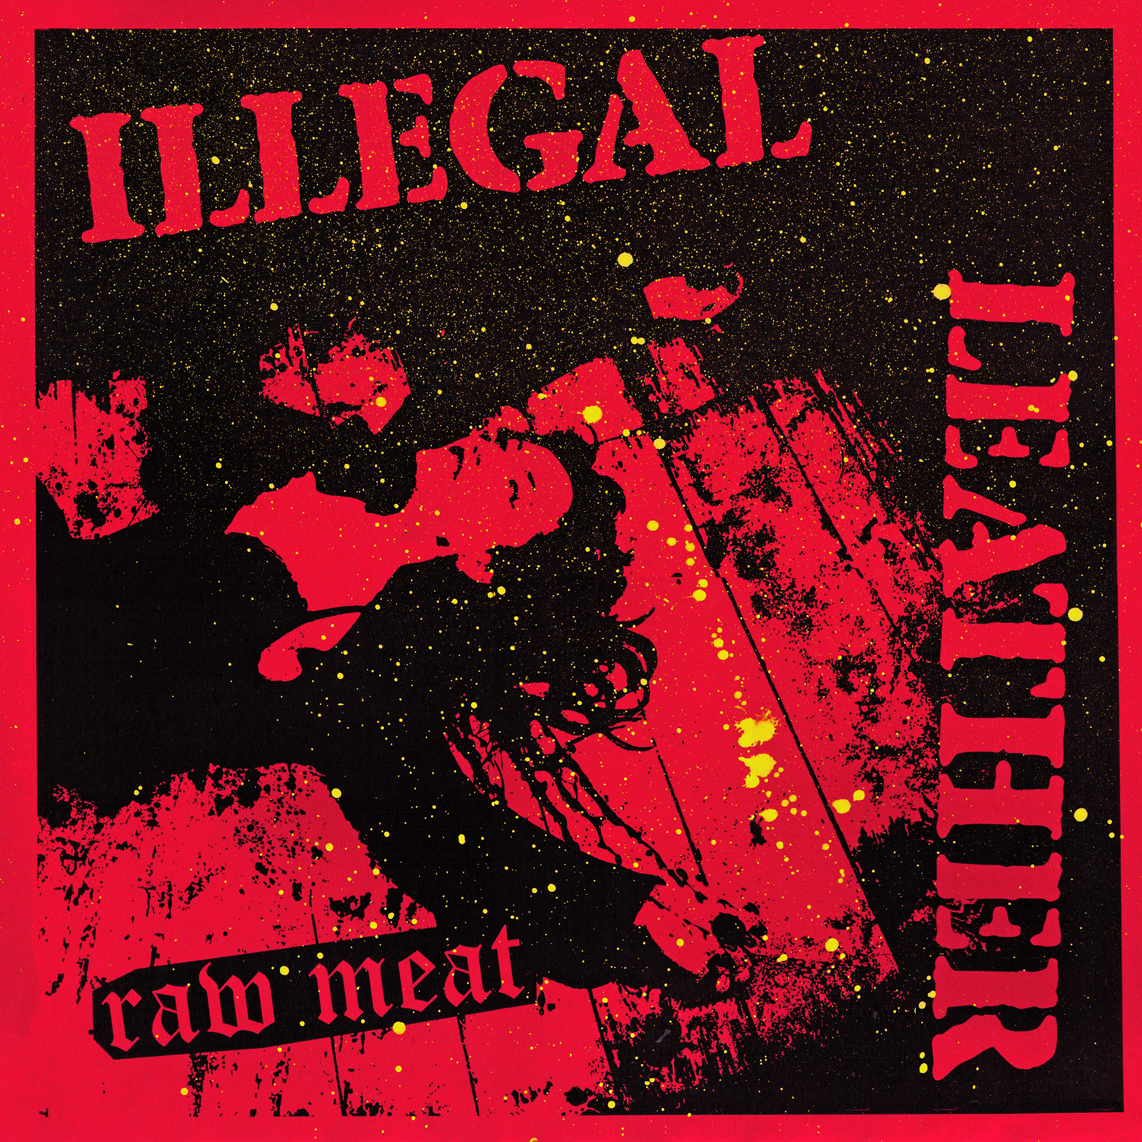 Illegal Leather- Raw Meat LP ~RARE RED COVER #4 OF 4-COVER QUADRILOGY LTD TO 35 HAND NUMBERED COPIES W/ CUSTOM BRIGHT YELLOW SPLATTERS!